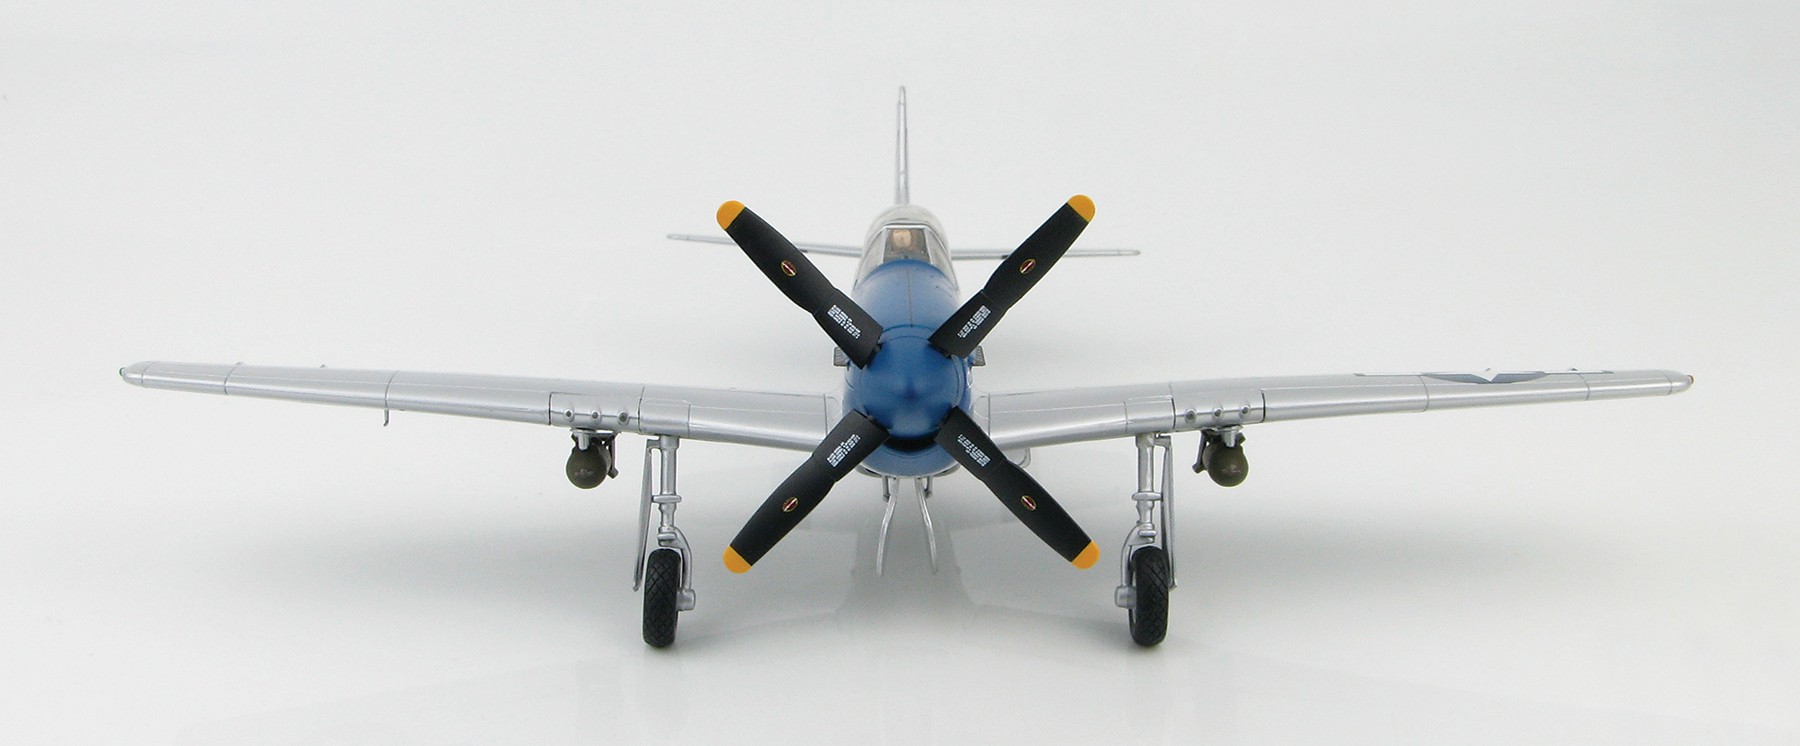 - Collectibles P-51D Series, HA7726 HA7726 Scale Item: ezToys 1:48 Models Capt. and Whisner 1944, Master, Hobby Air Diecast “Moonbeam McSwine” Mustang W. Power